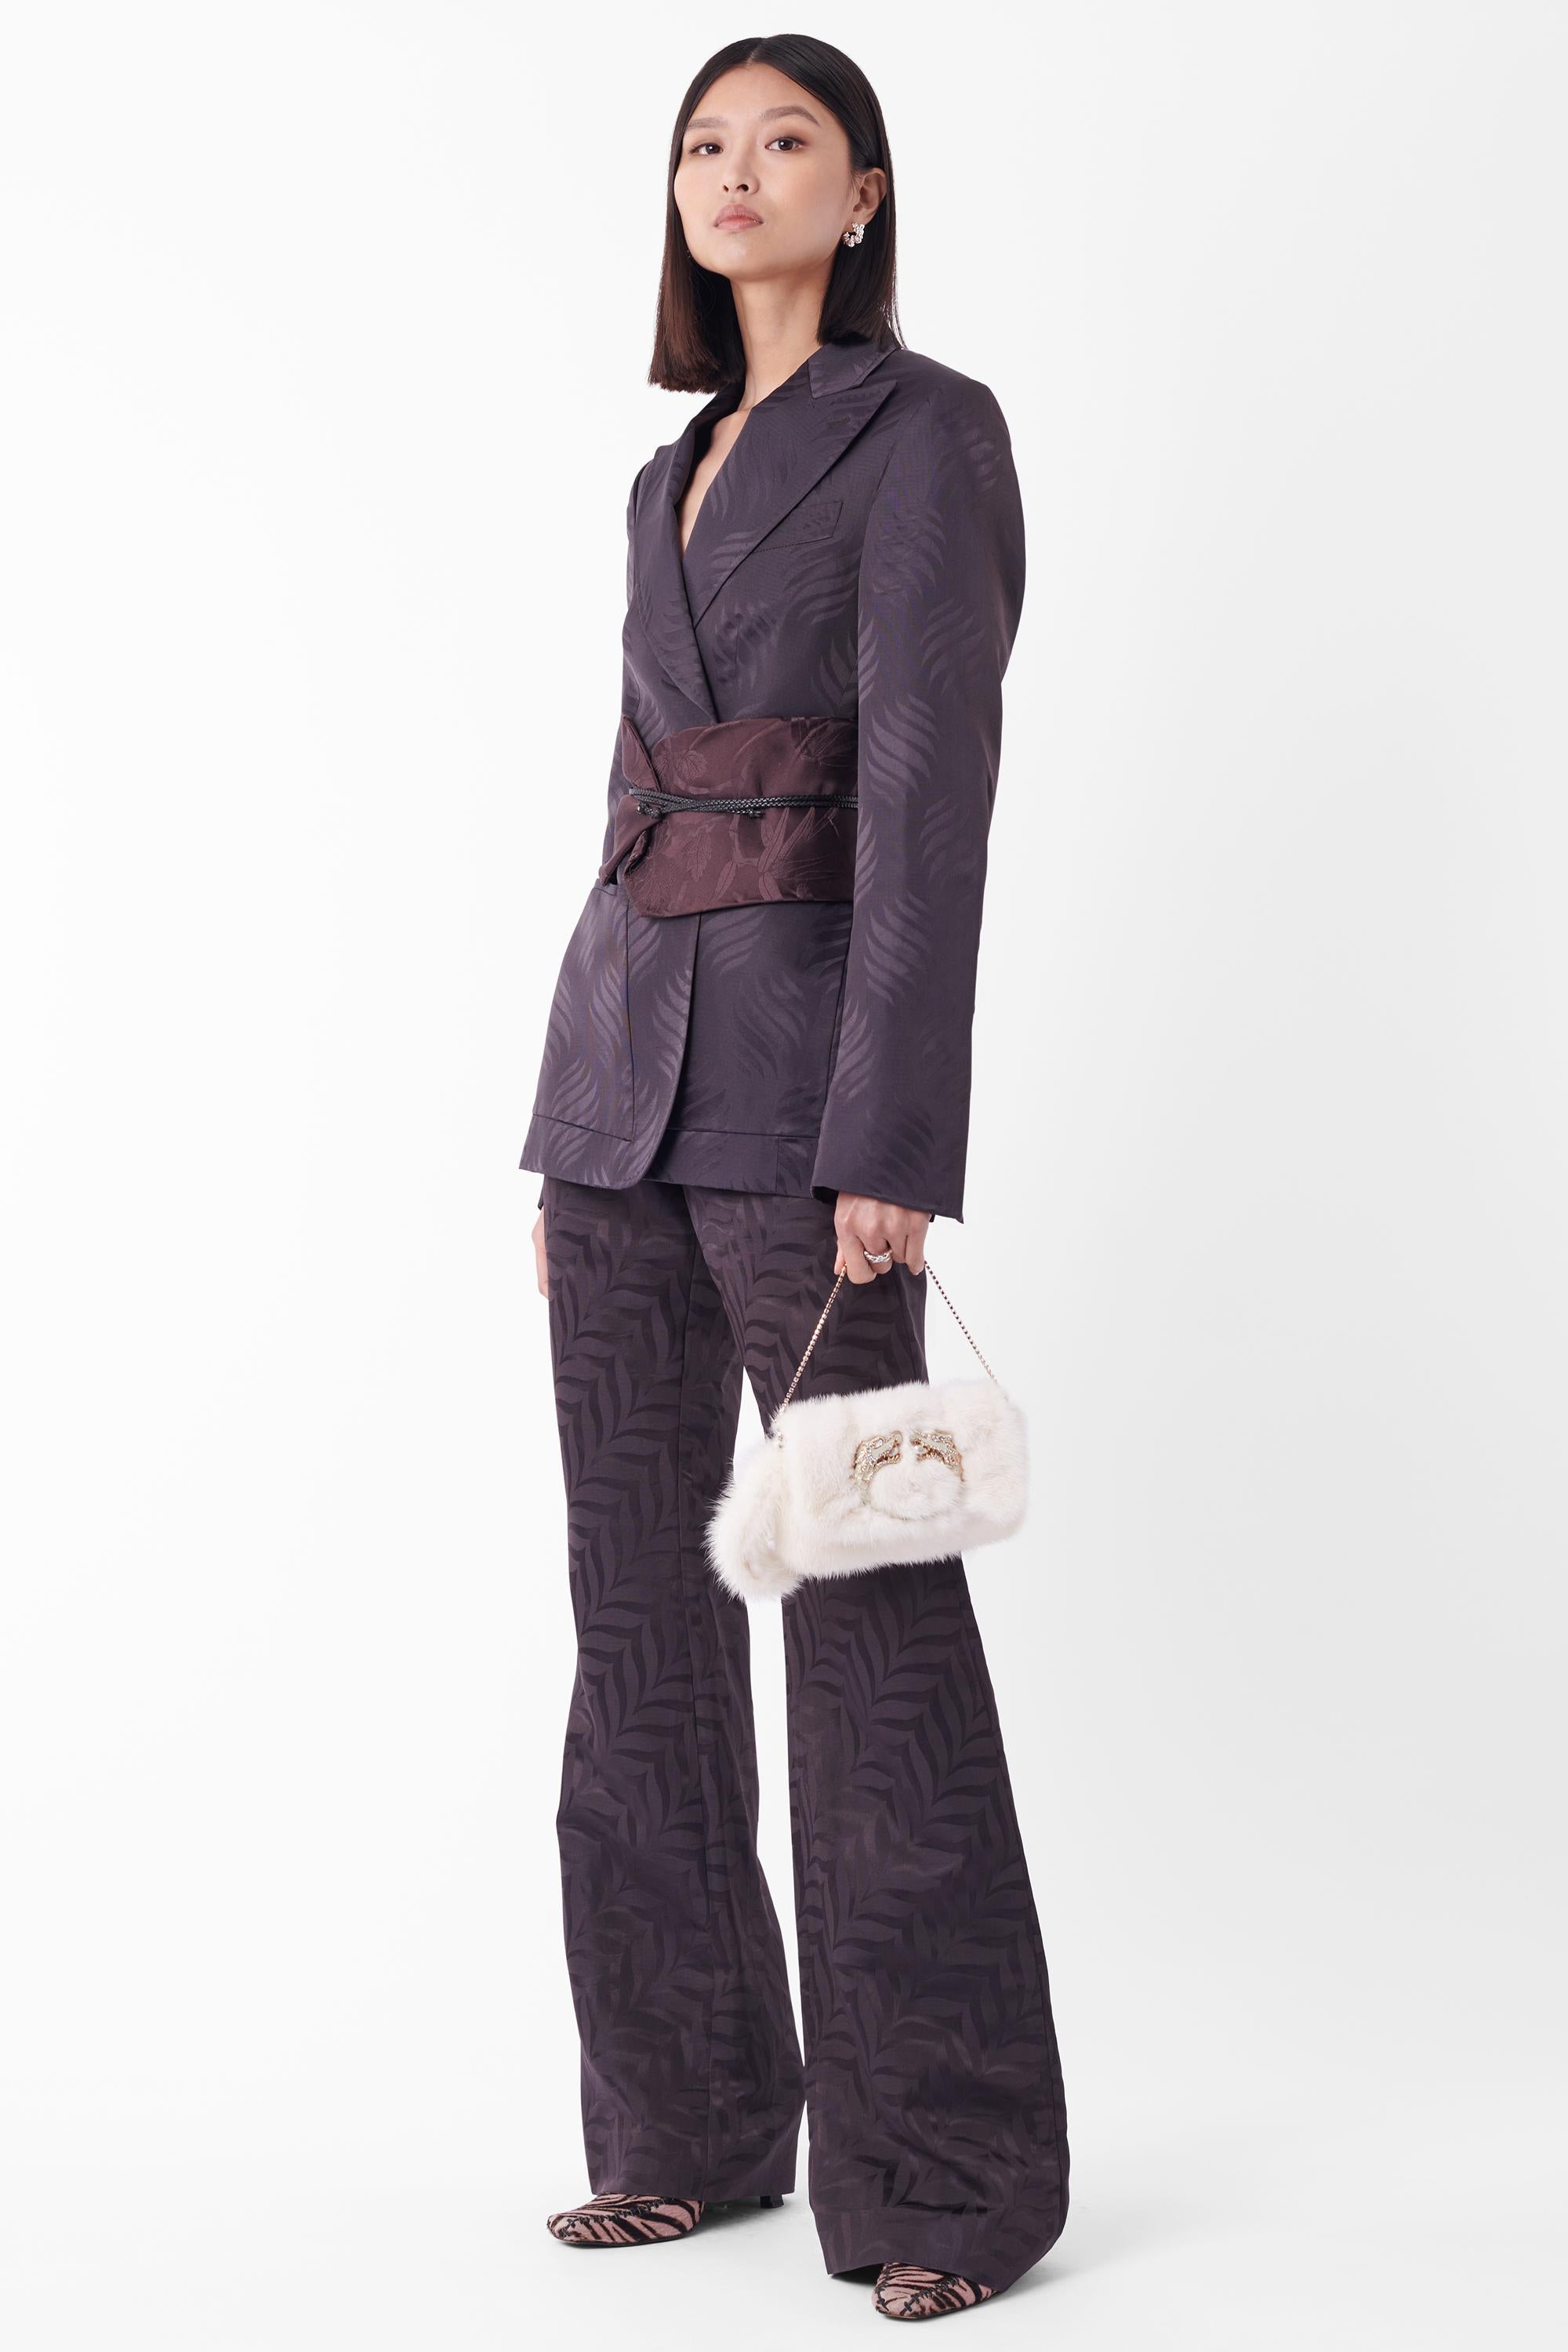 We are excited to present this Tom Ford for Gucci iconic Fall Winter 2002 kimono runway obi belt set. Features embossed print over the entire co-ord, with two front pockets on the blazer and two invisible hip pockets on the trousers, invisible zip